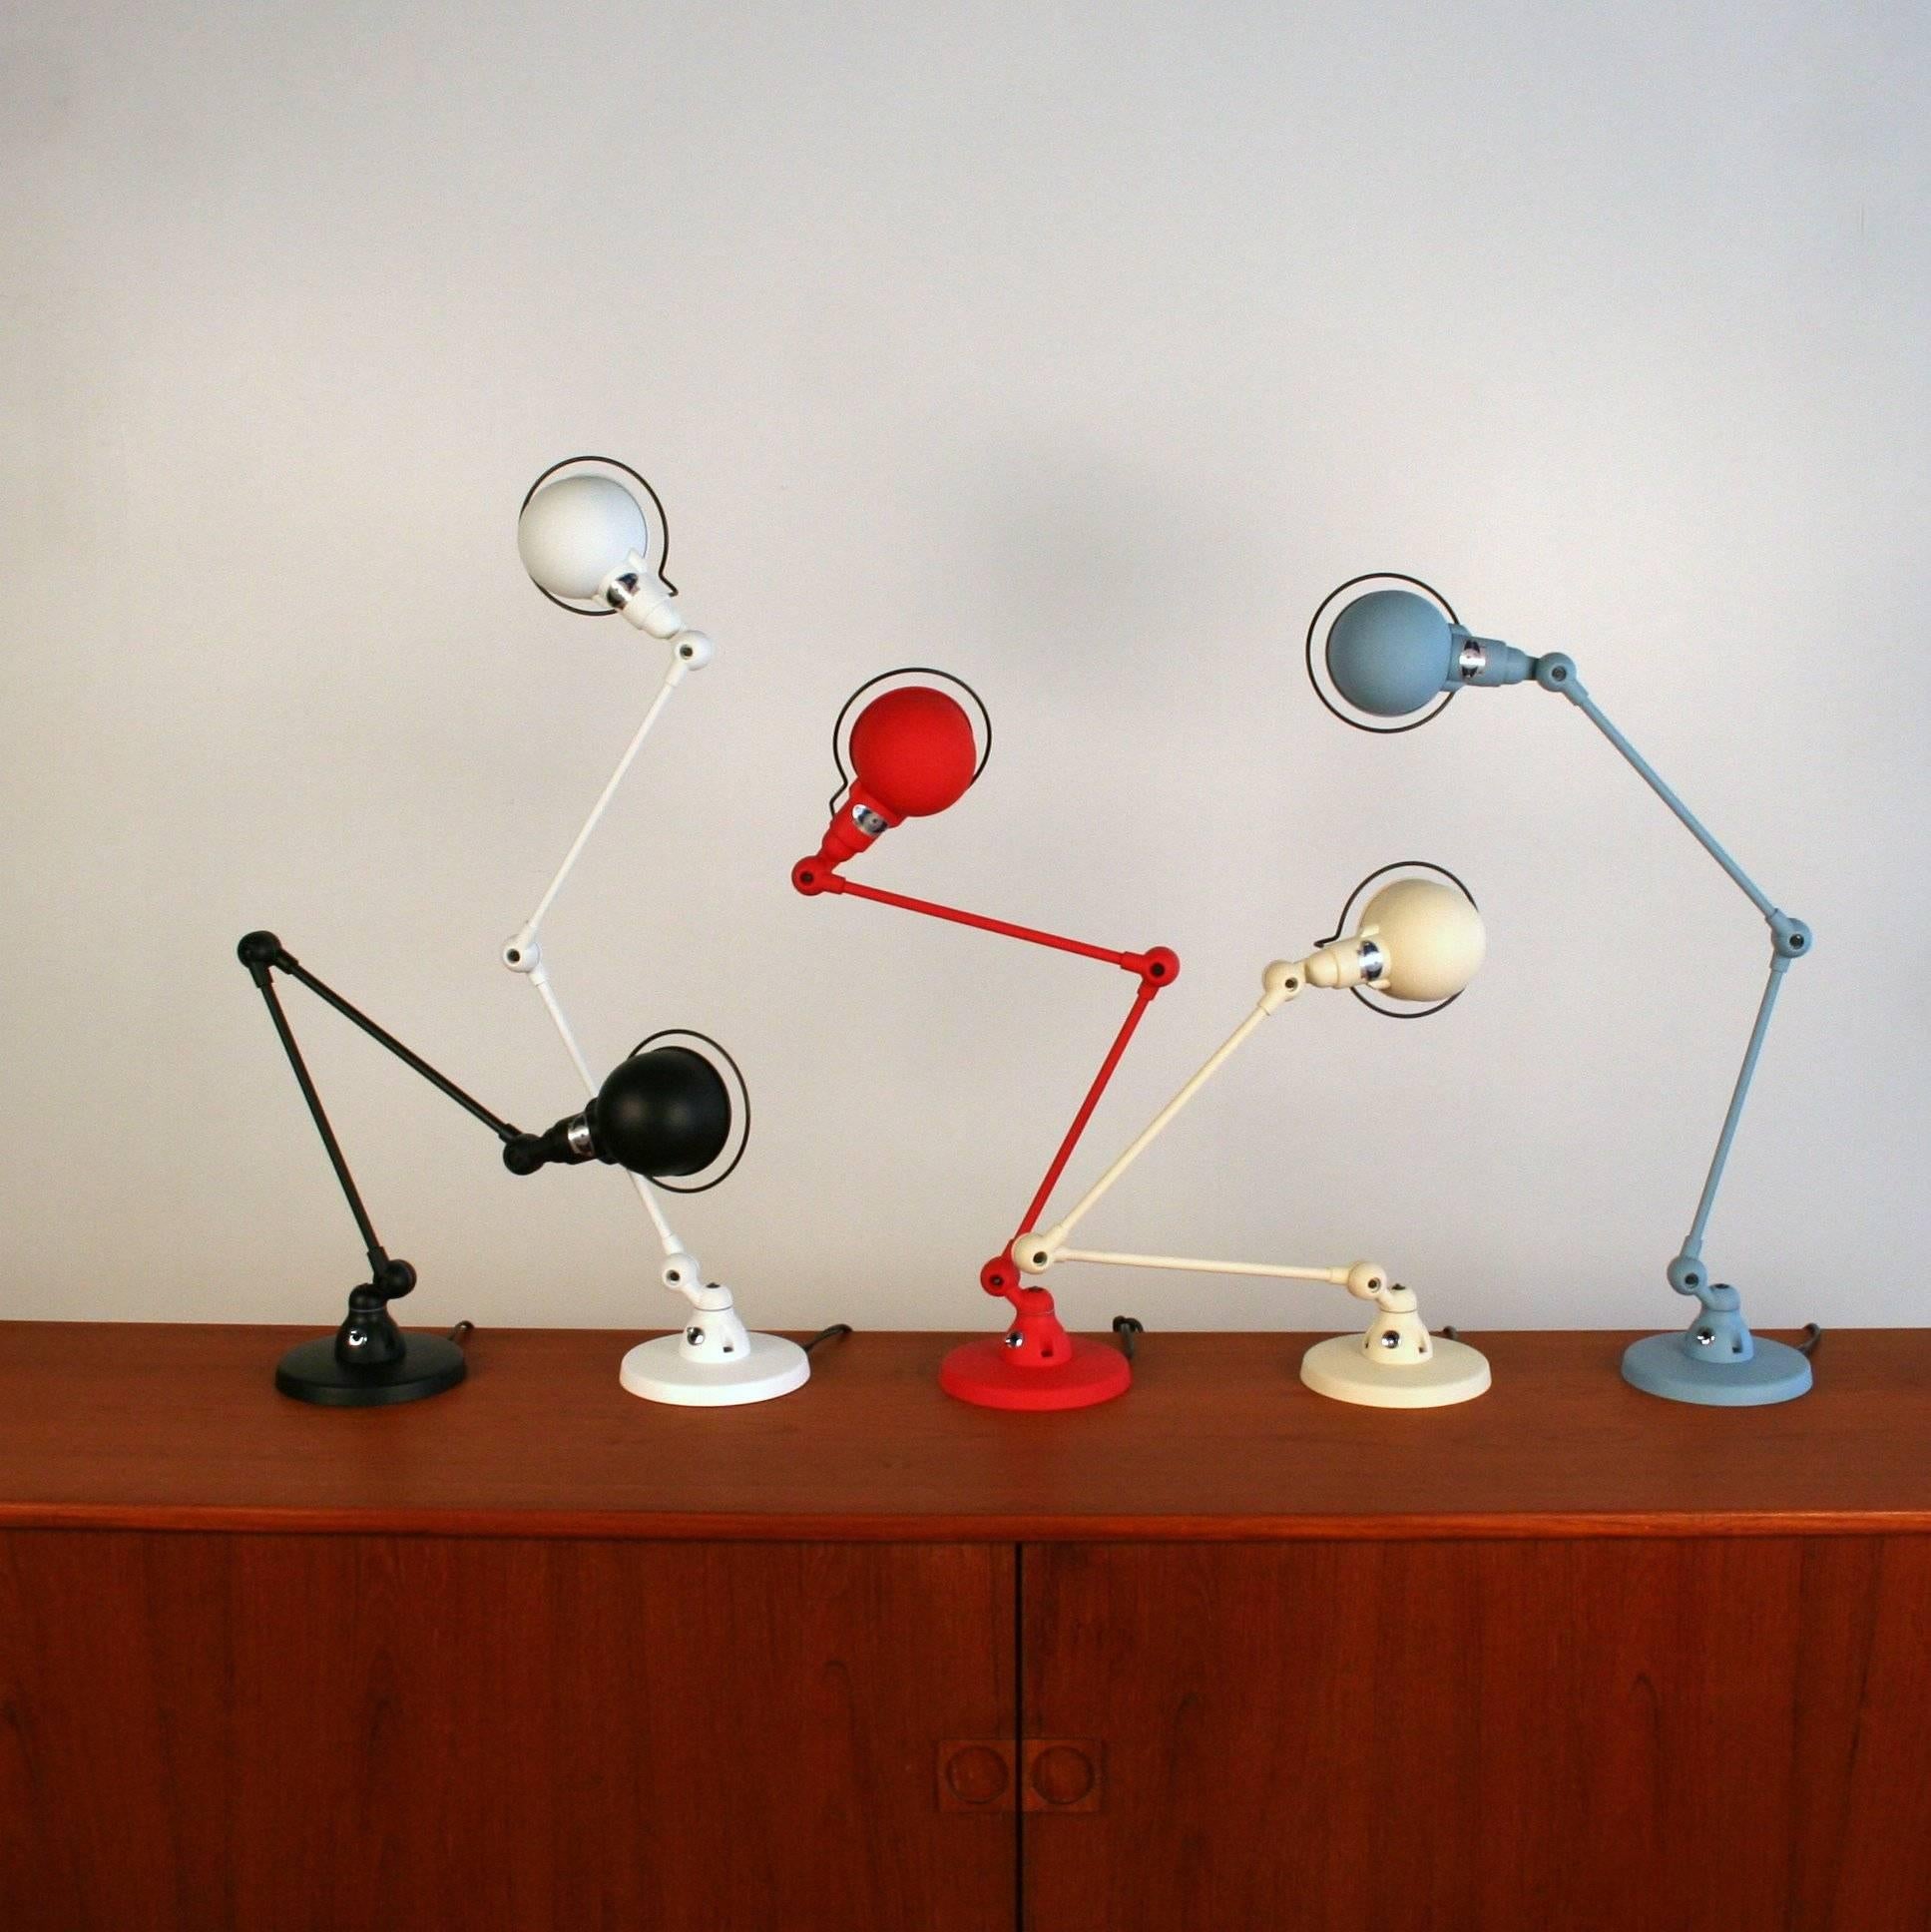 Direct from France, these adjustable metal lamps feature a matte finish and sturdy mechanics. A great task lamp that is highly functional, high quality and highly adorable. Each lamp has an individual serial number for authenticity. Available in